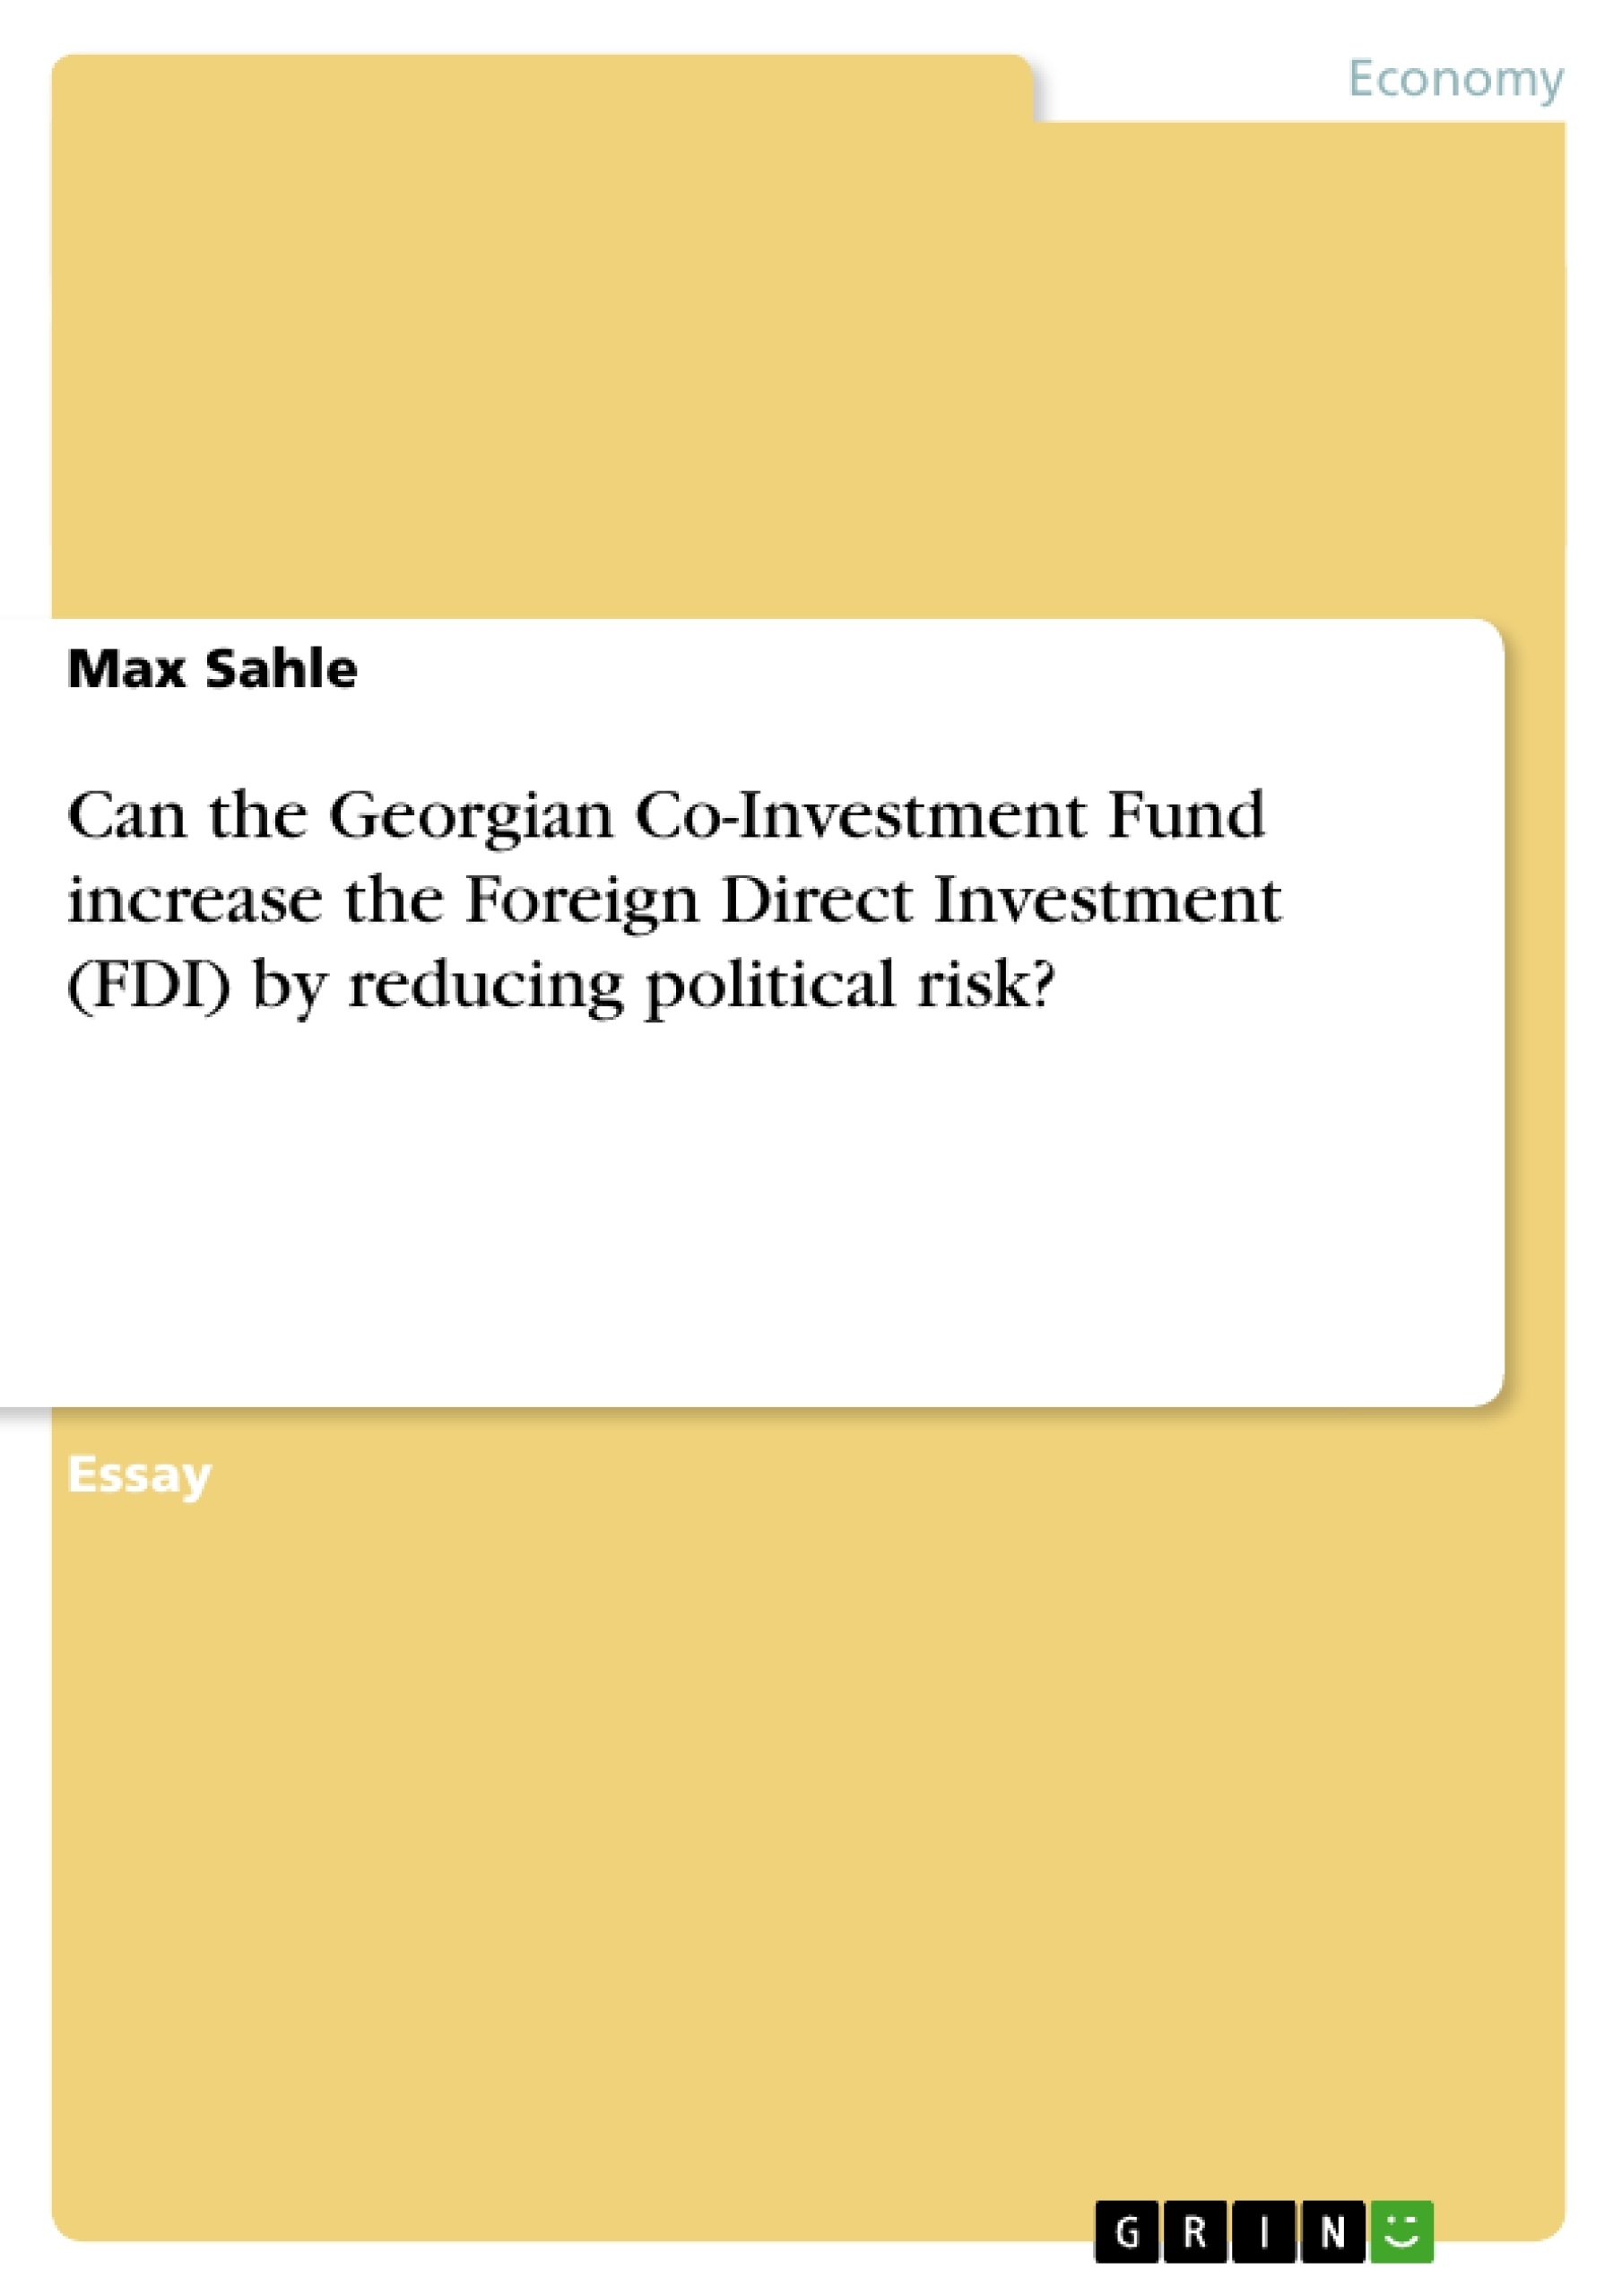 Título: Can the Georgian Co-Investment Fund increase the Foreign Direct Investment (FDI) by reducing political risk?